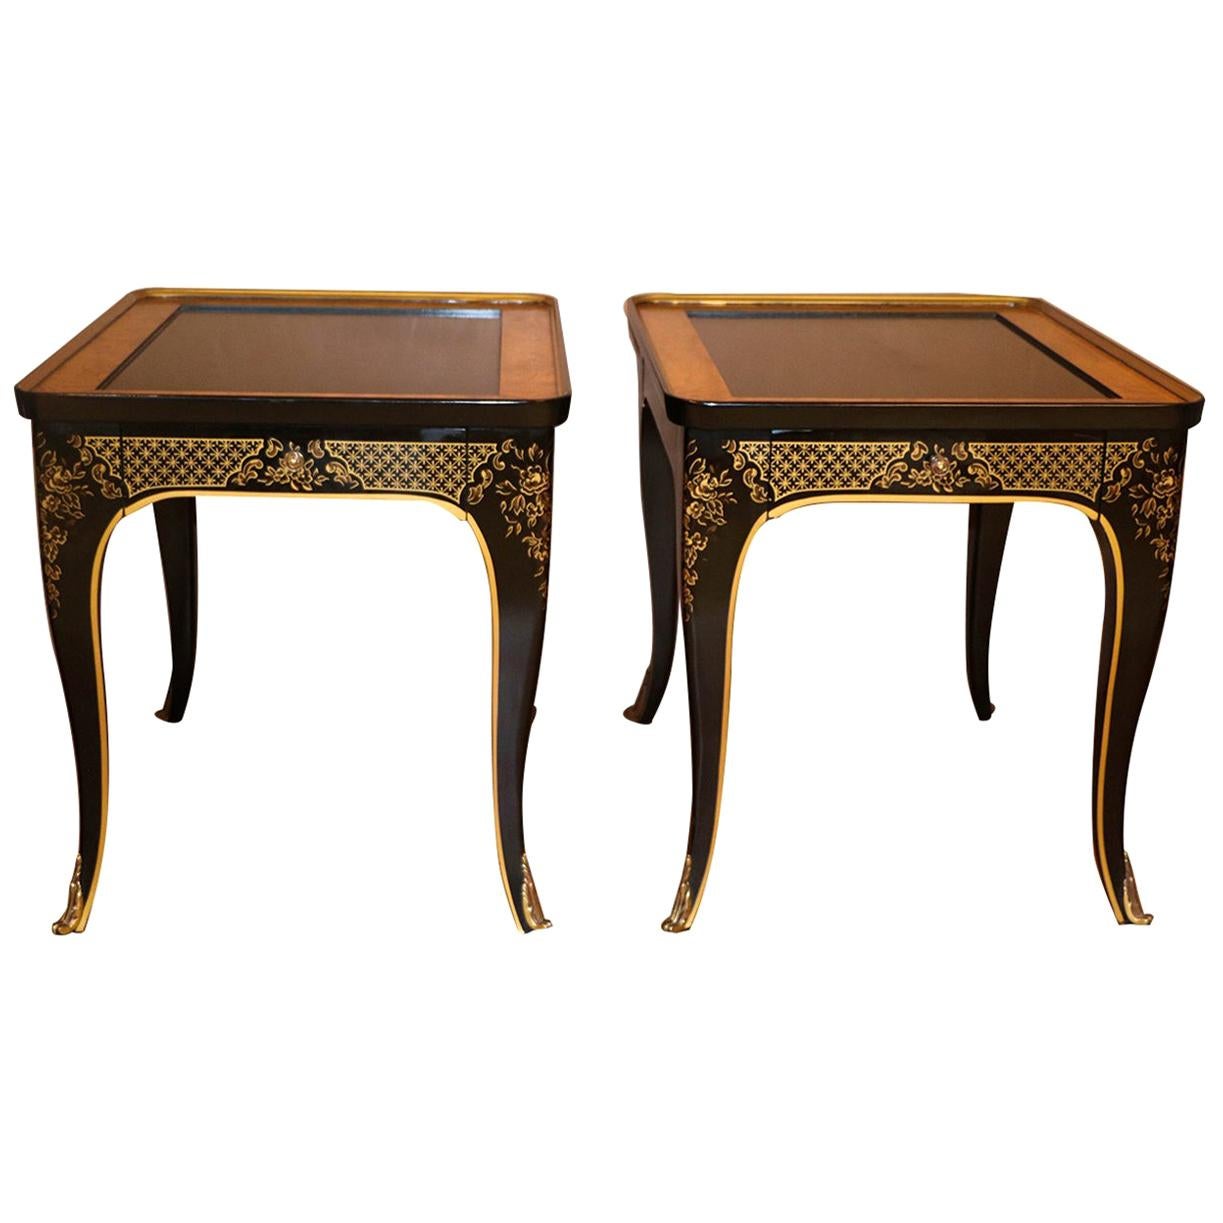 Pair of Et Cetera Chinoiserie Black Lacquer Side Tables by Drexel